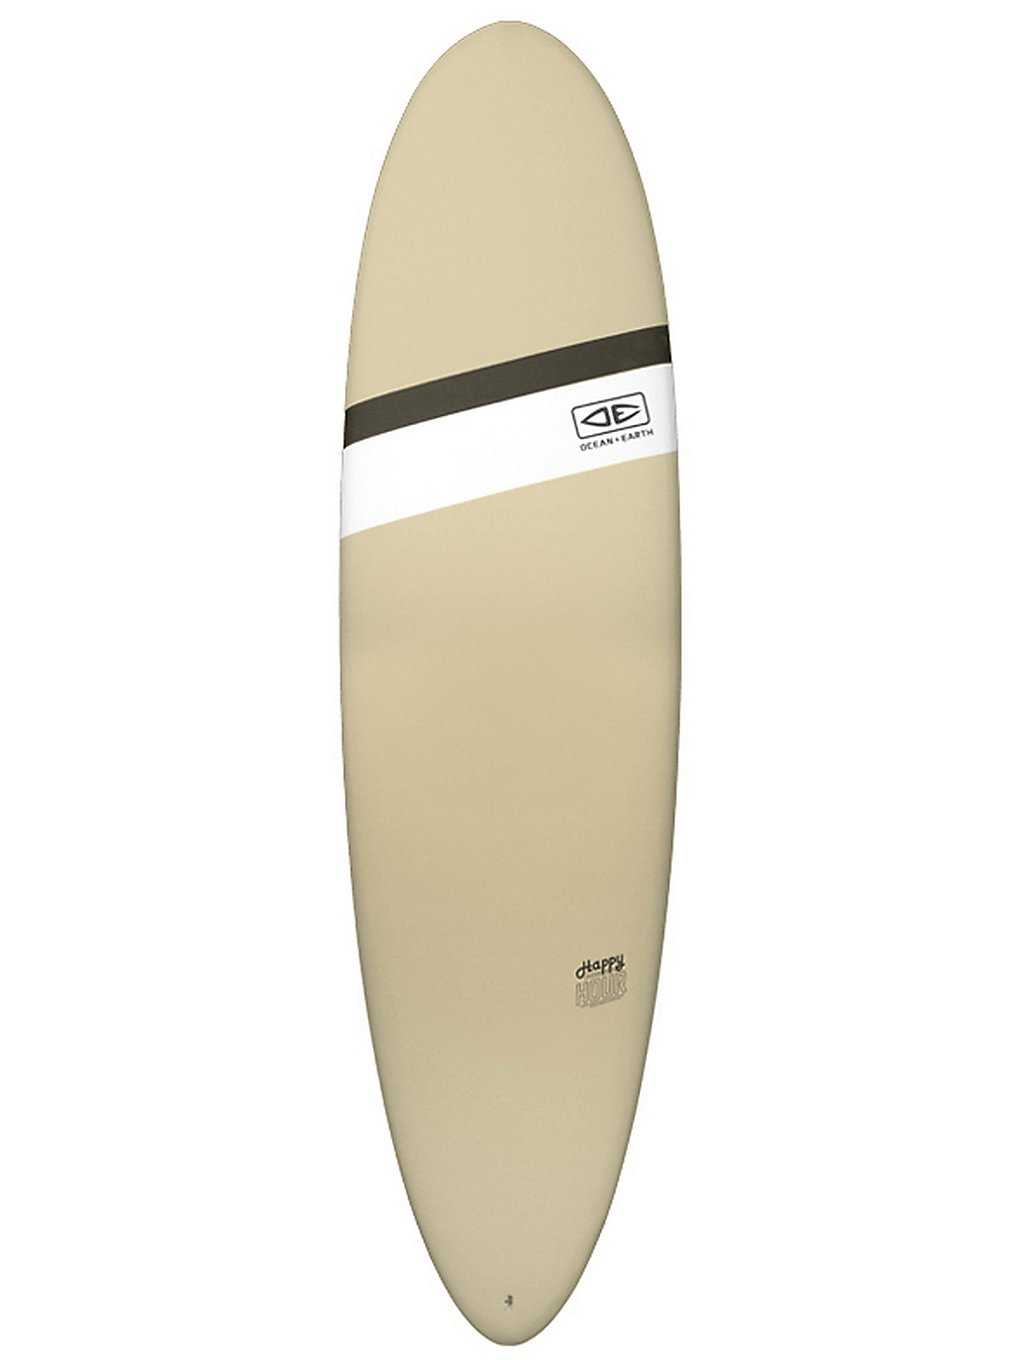 Ocean & Earth Happy Hour Epoxy Soft 52L 7'0 Surfboard sand